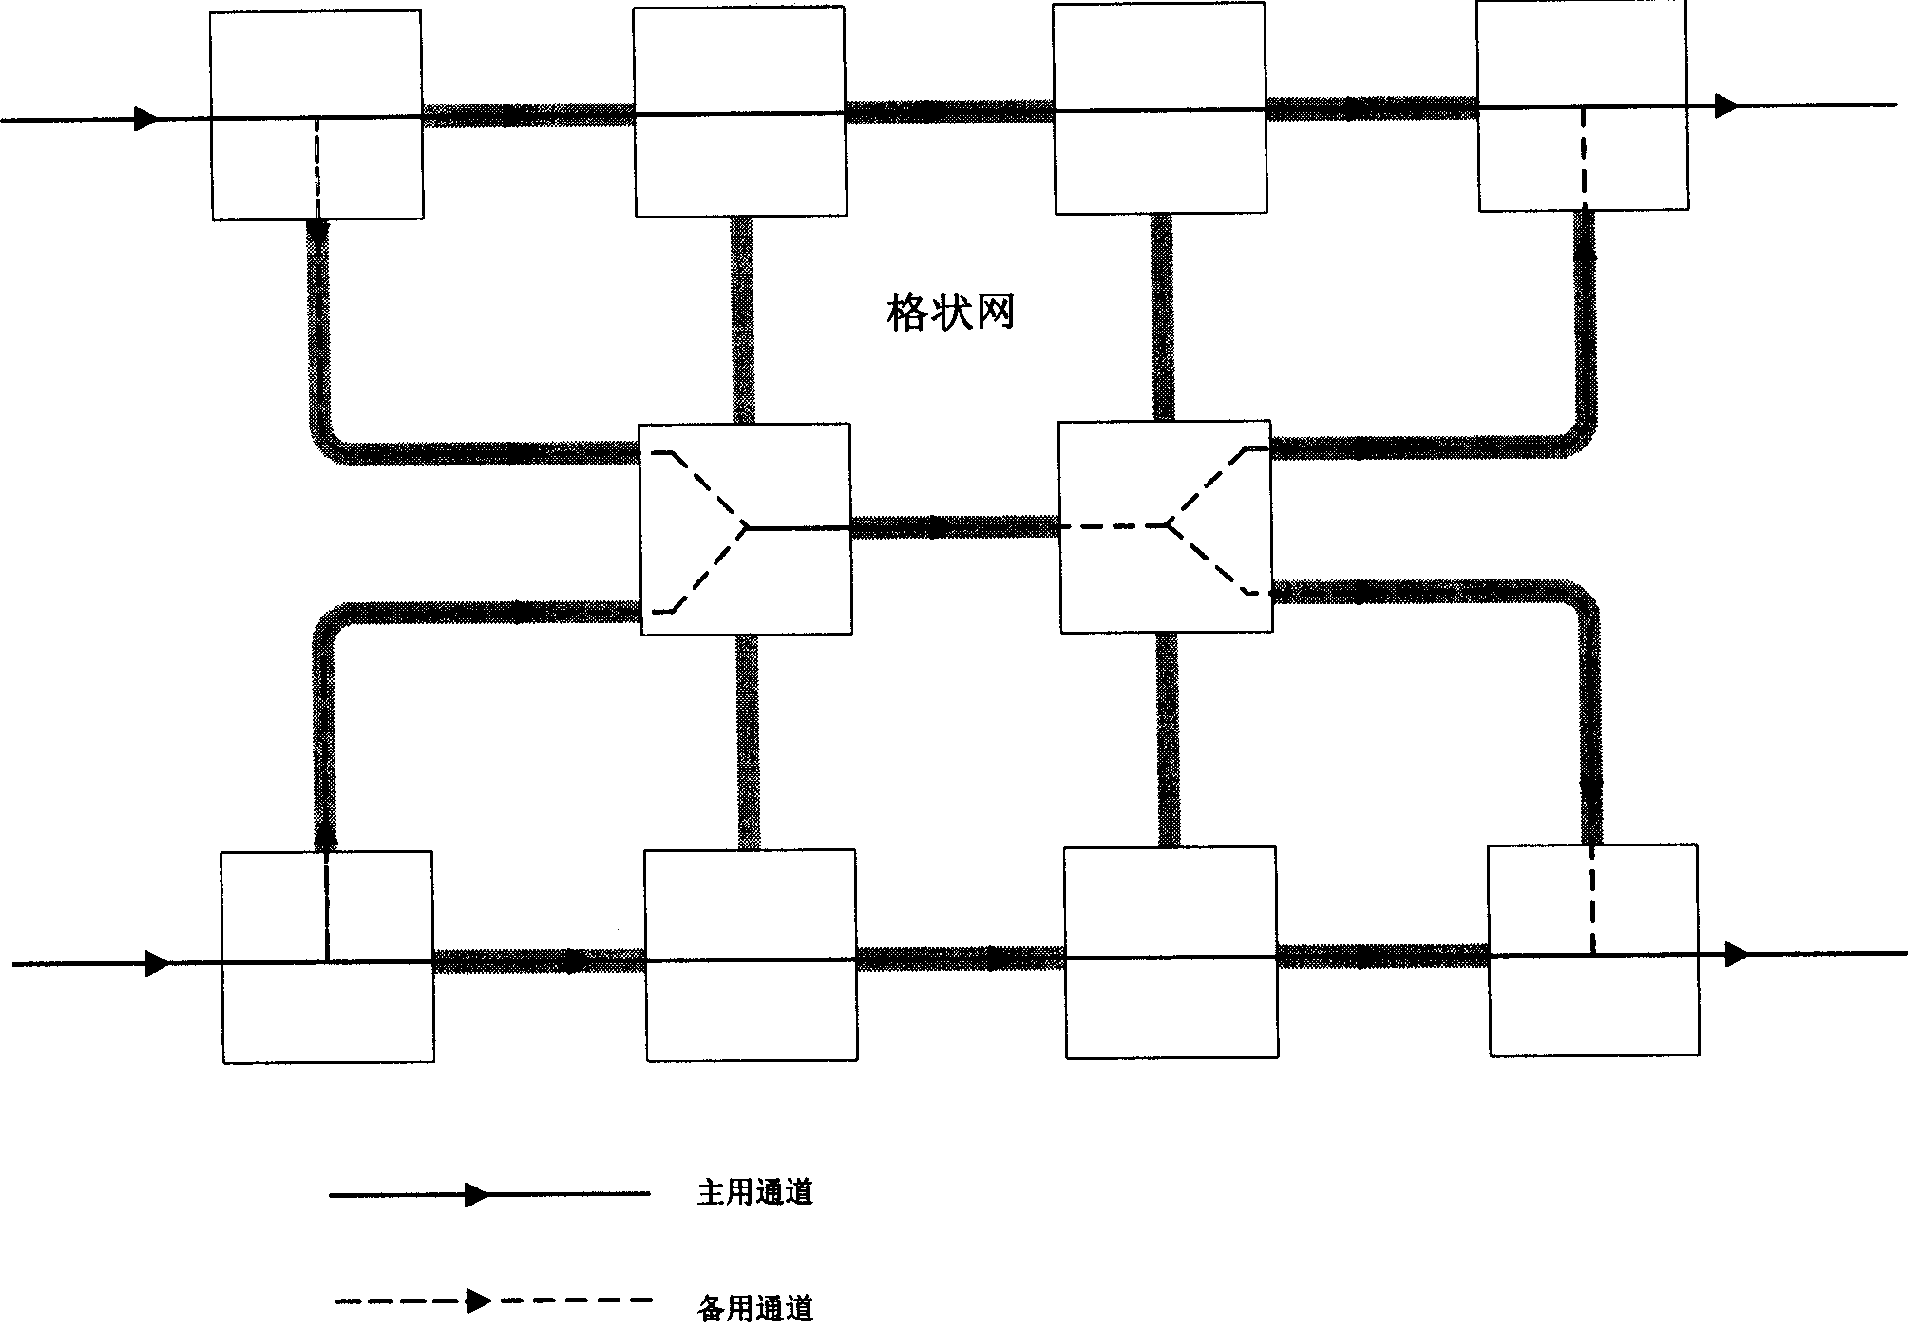 Method of proceeding failure recovery using shared spare passage in lattice shape network